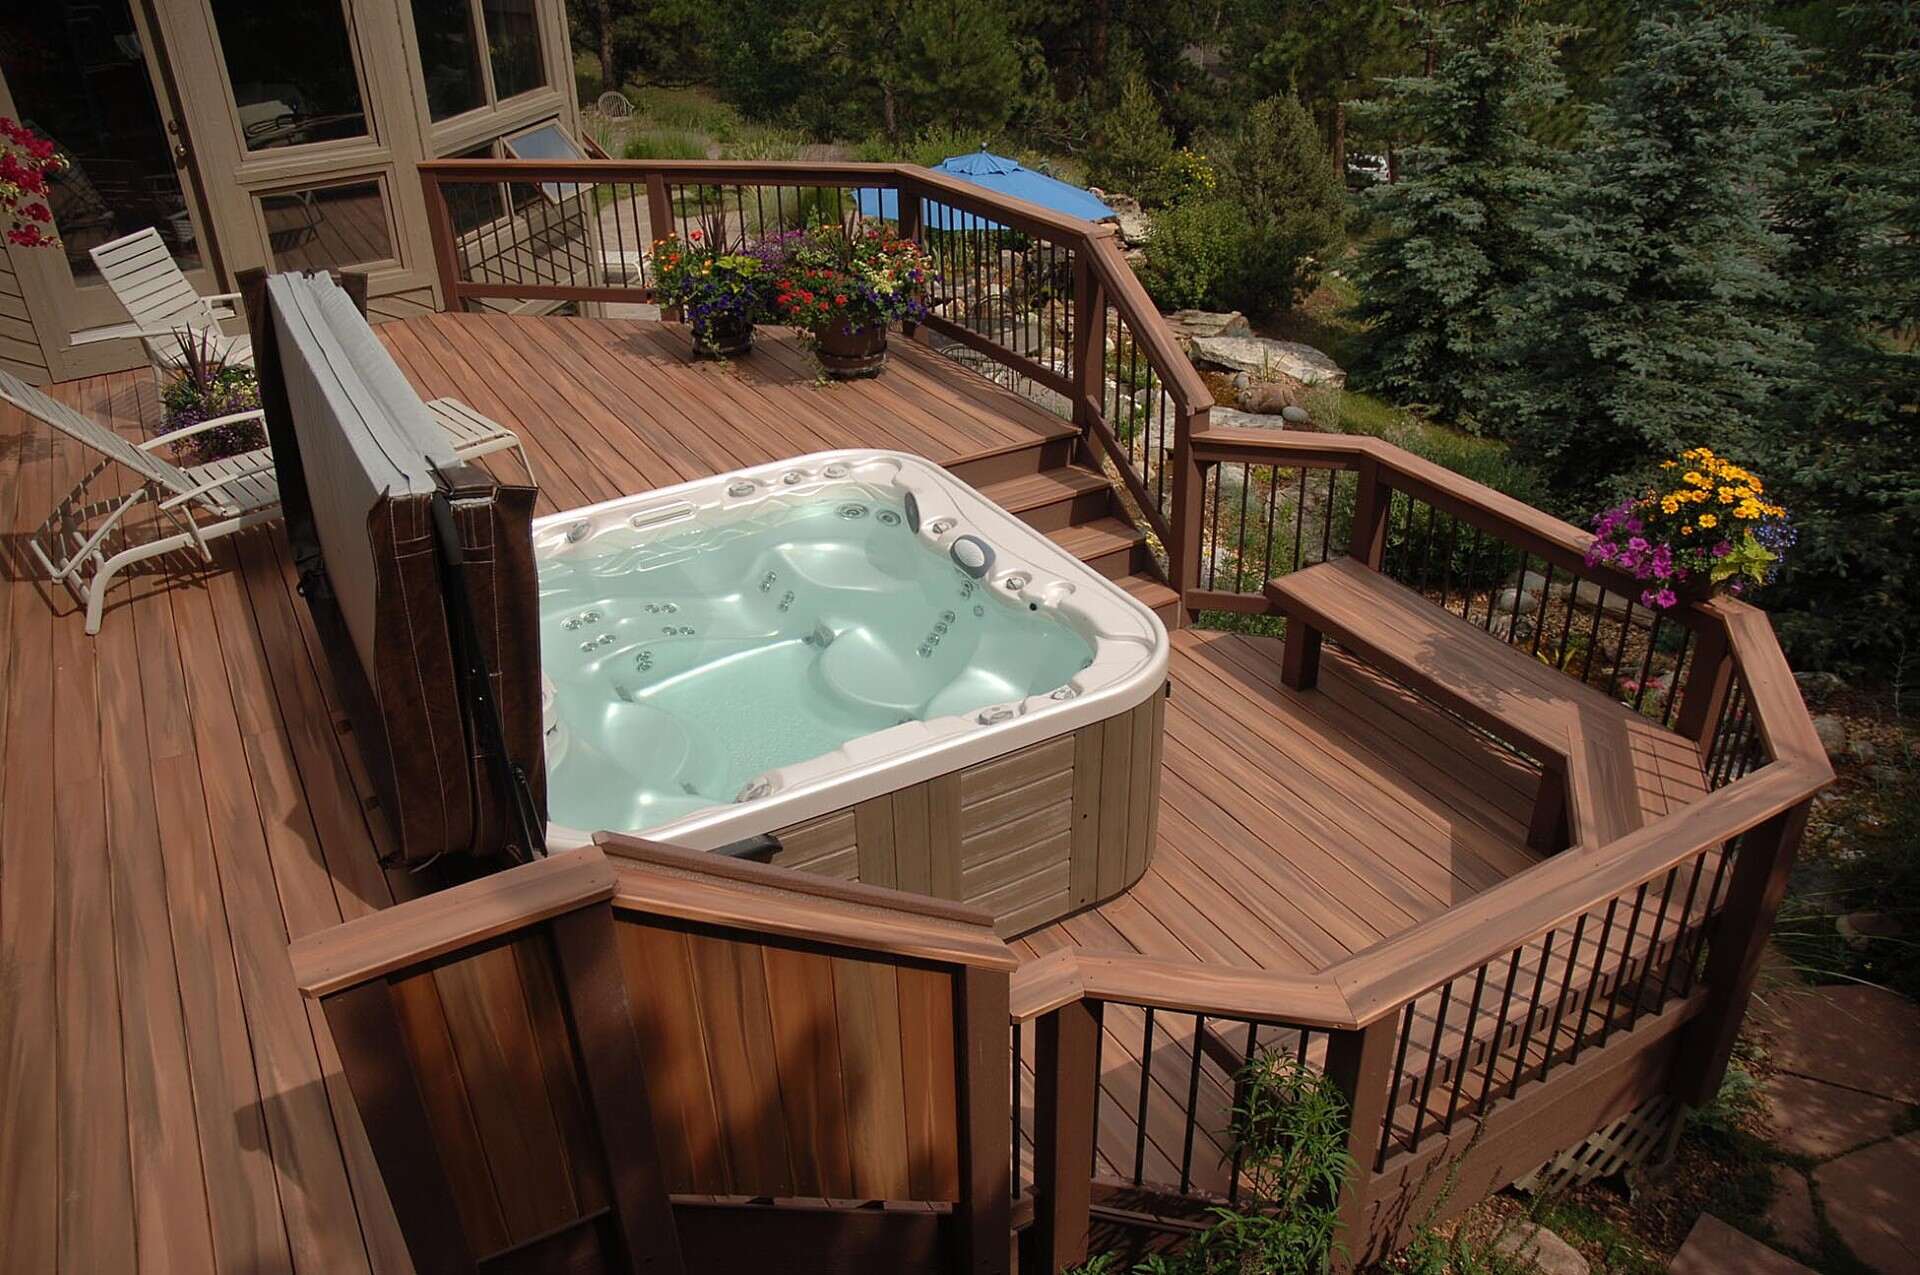 How To Remove Hot Tub From Deck